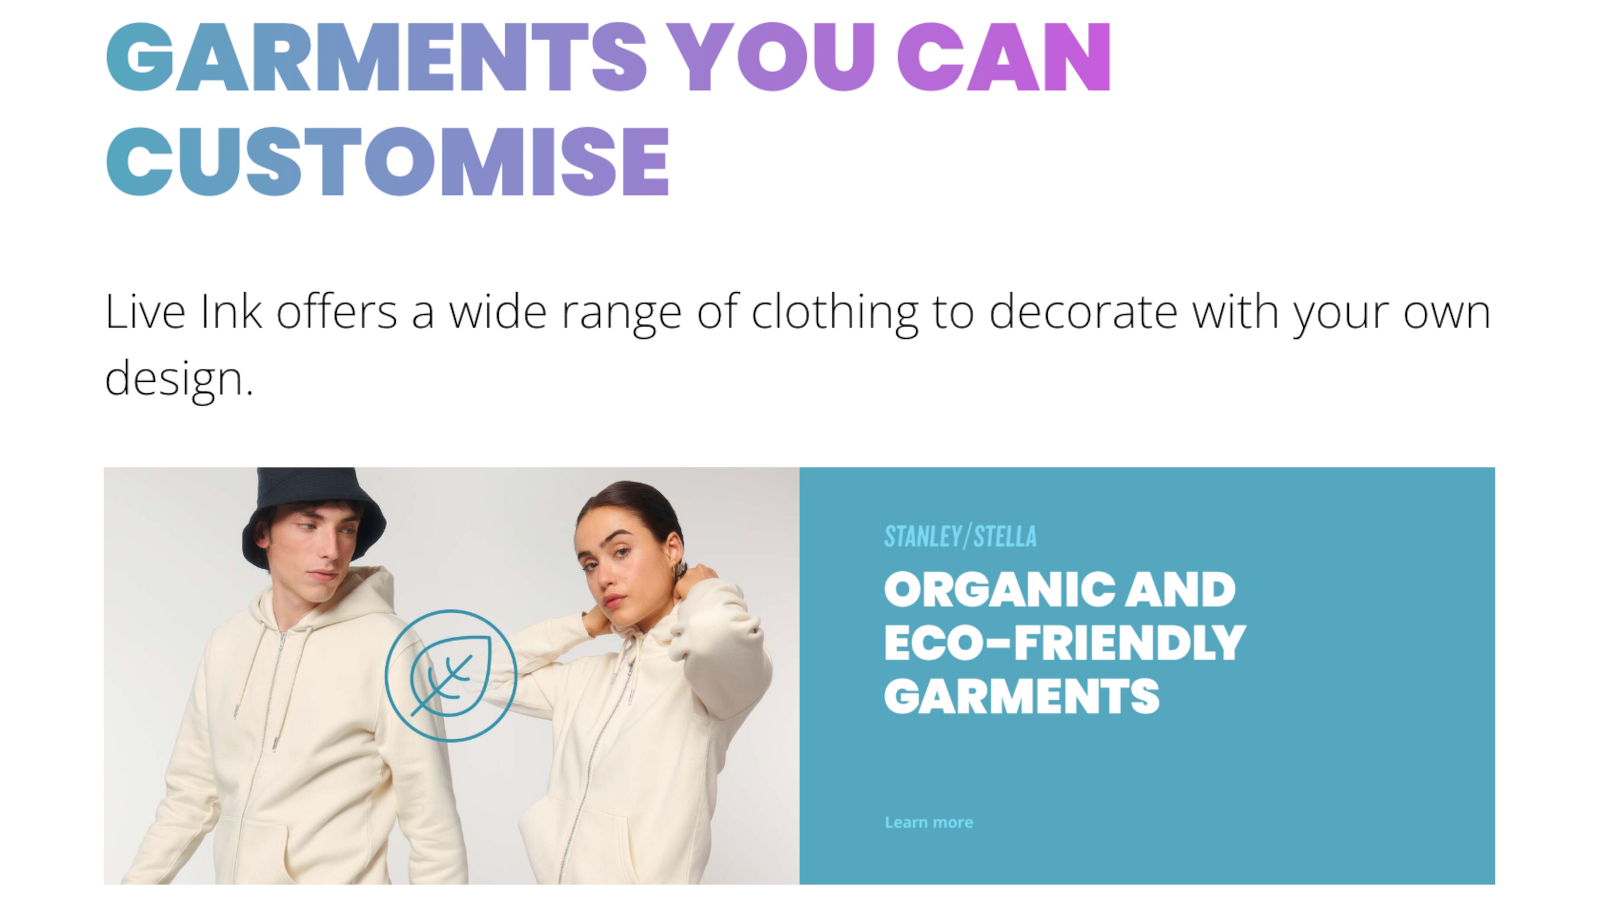 Live Ink offers a wide range of organic clothing to decorate